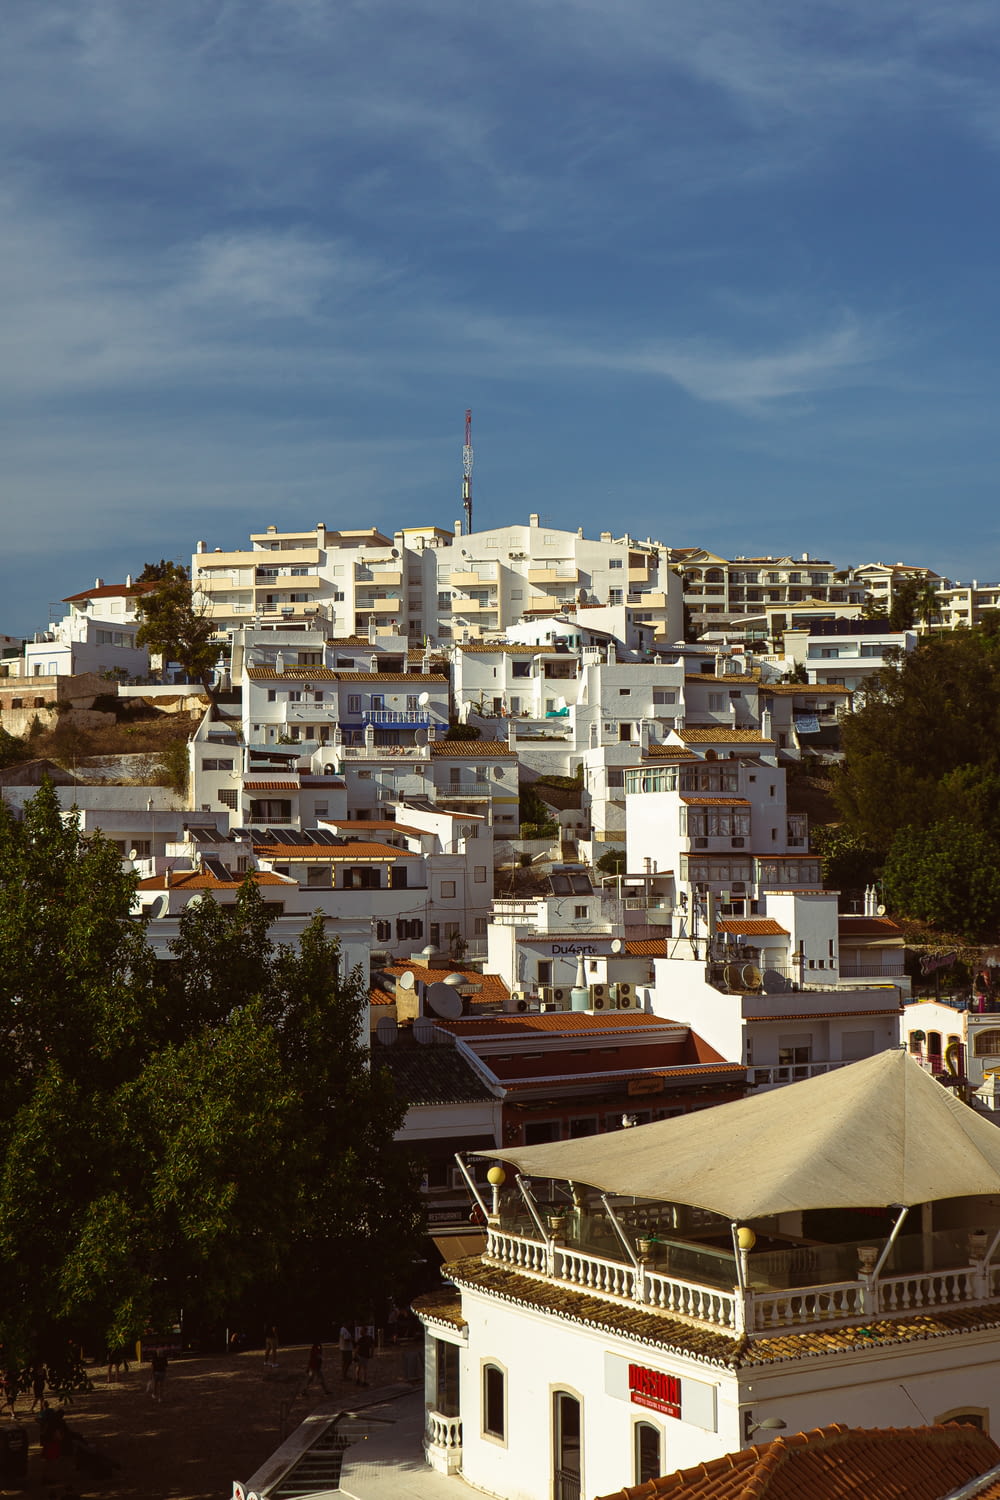 a view of a city with white buildings